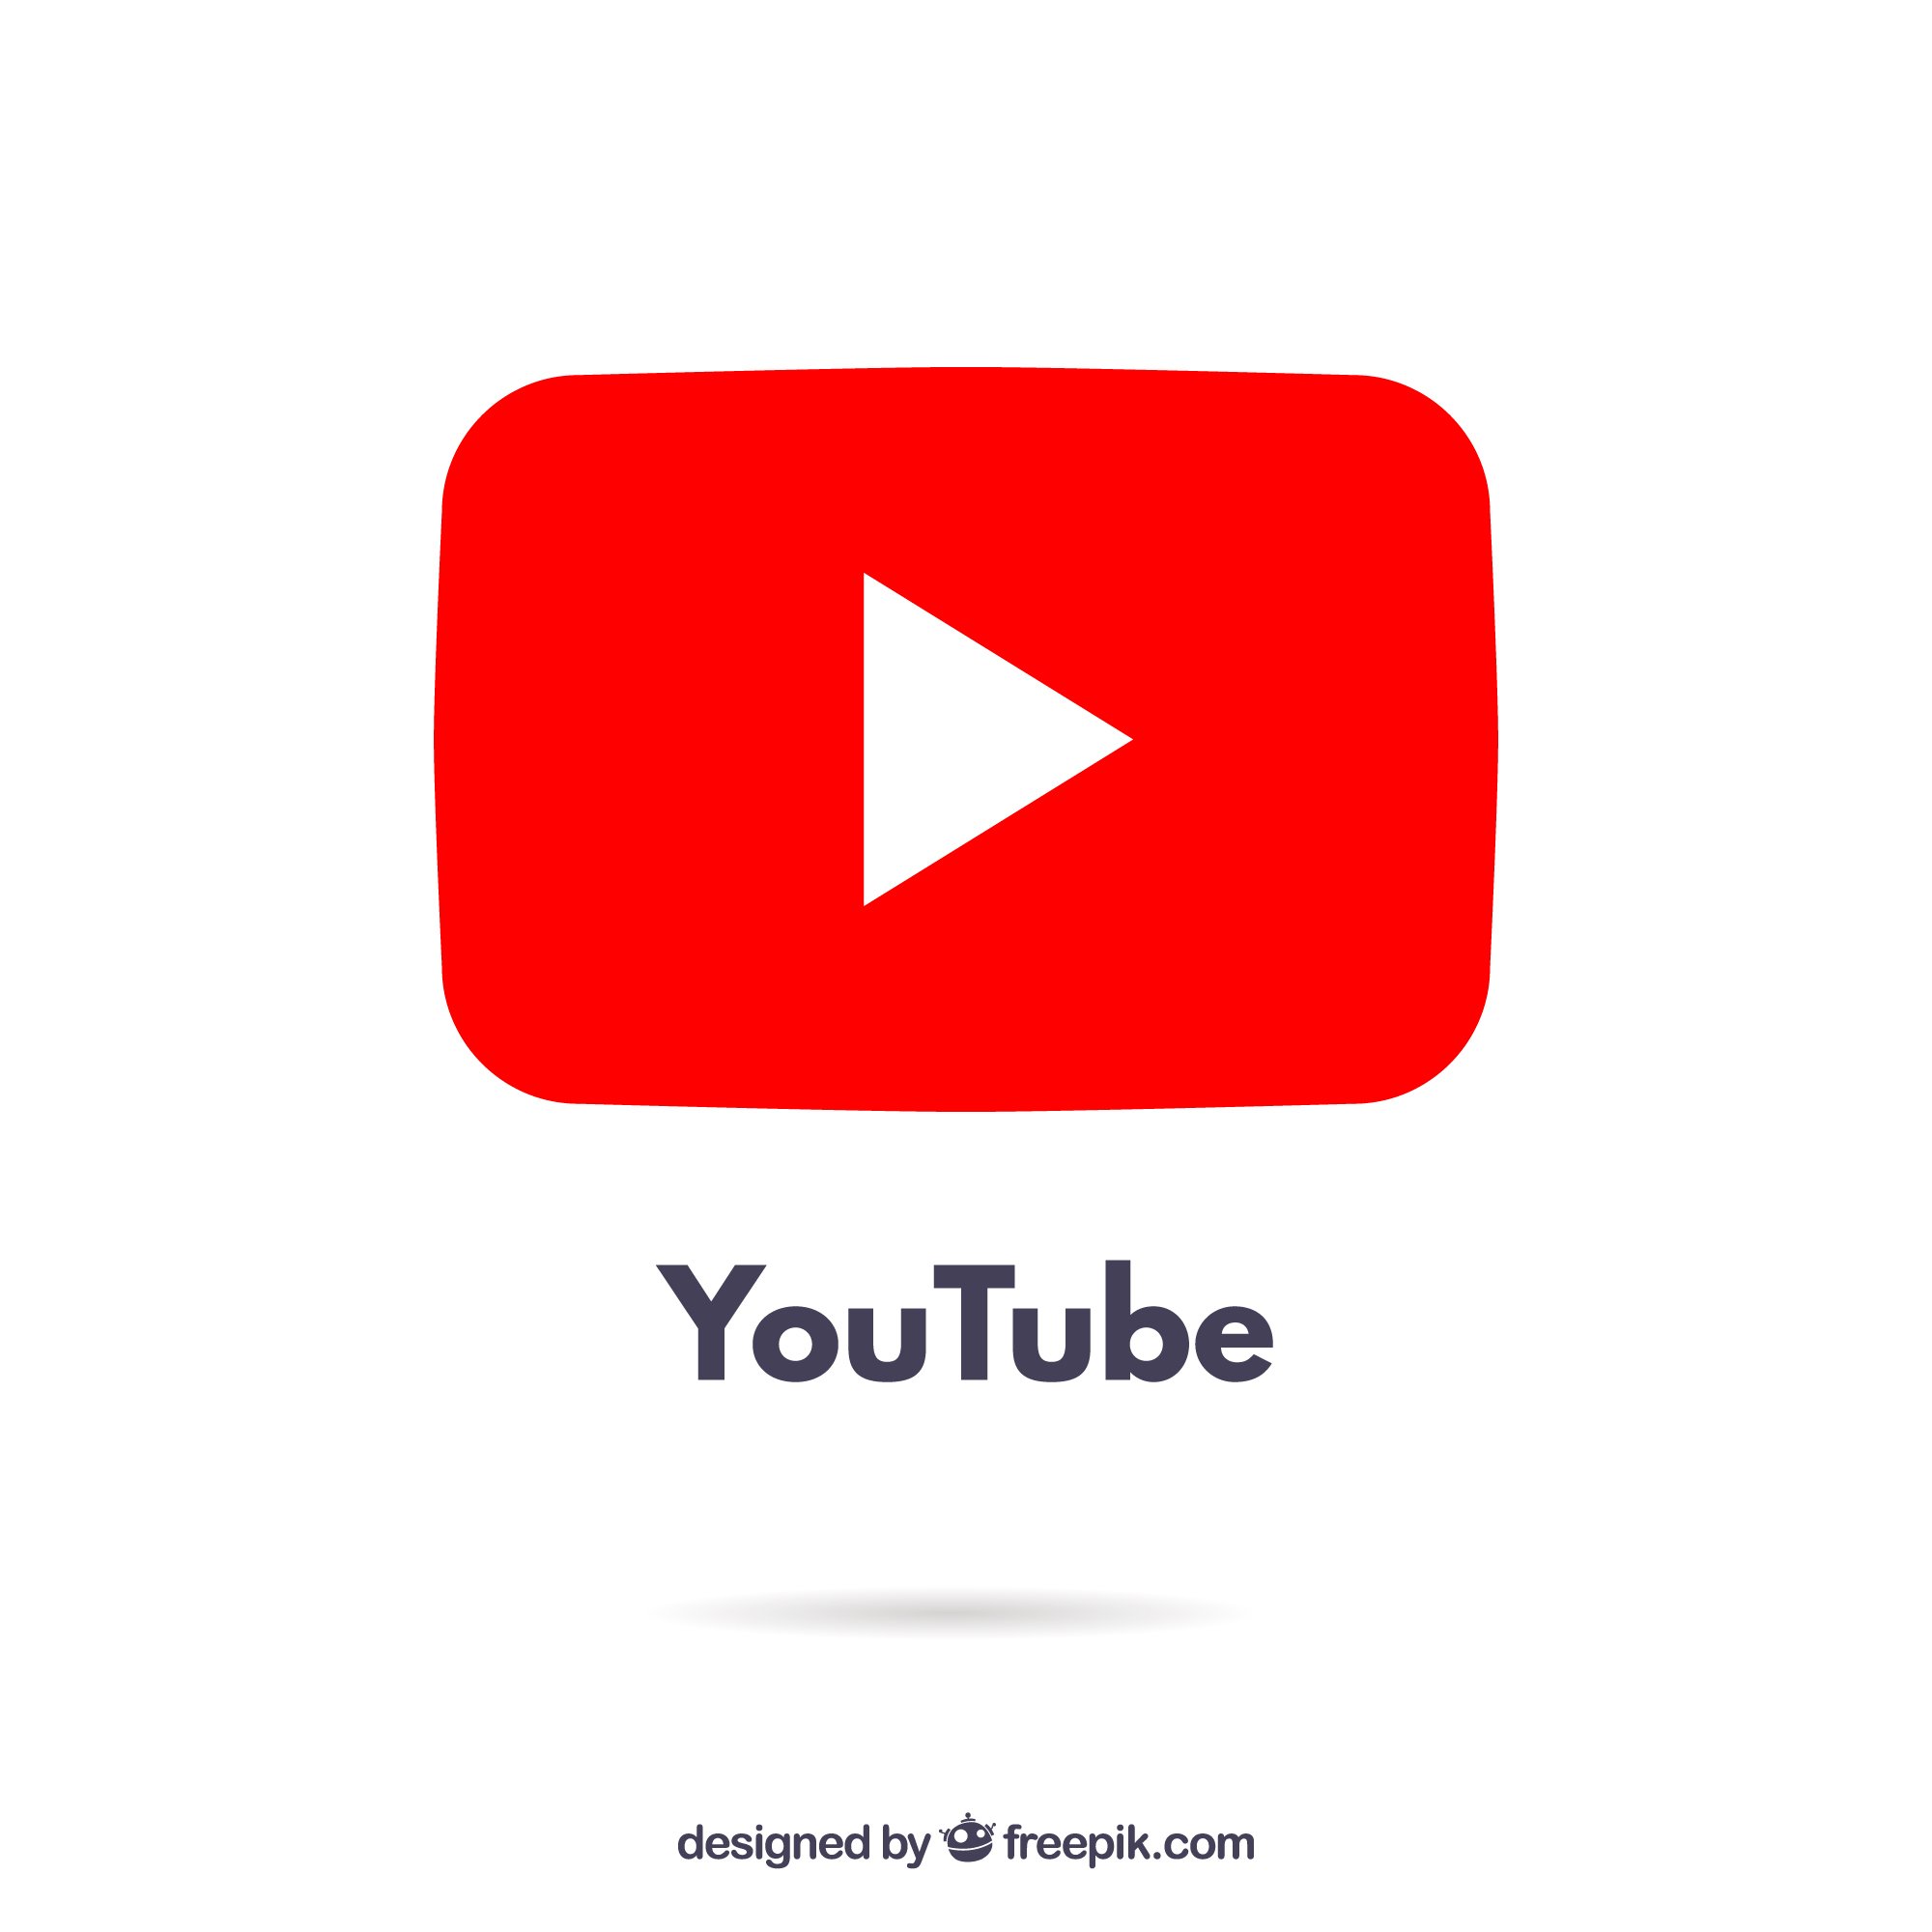 YouTube - CPD Accredited